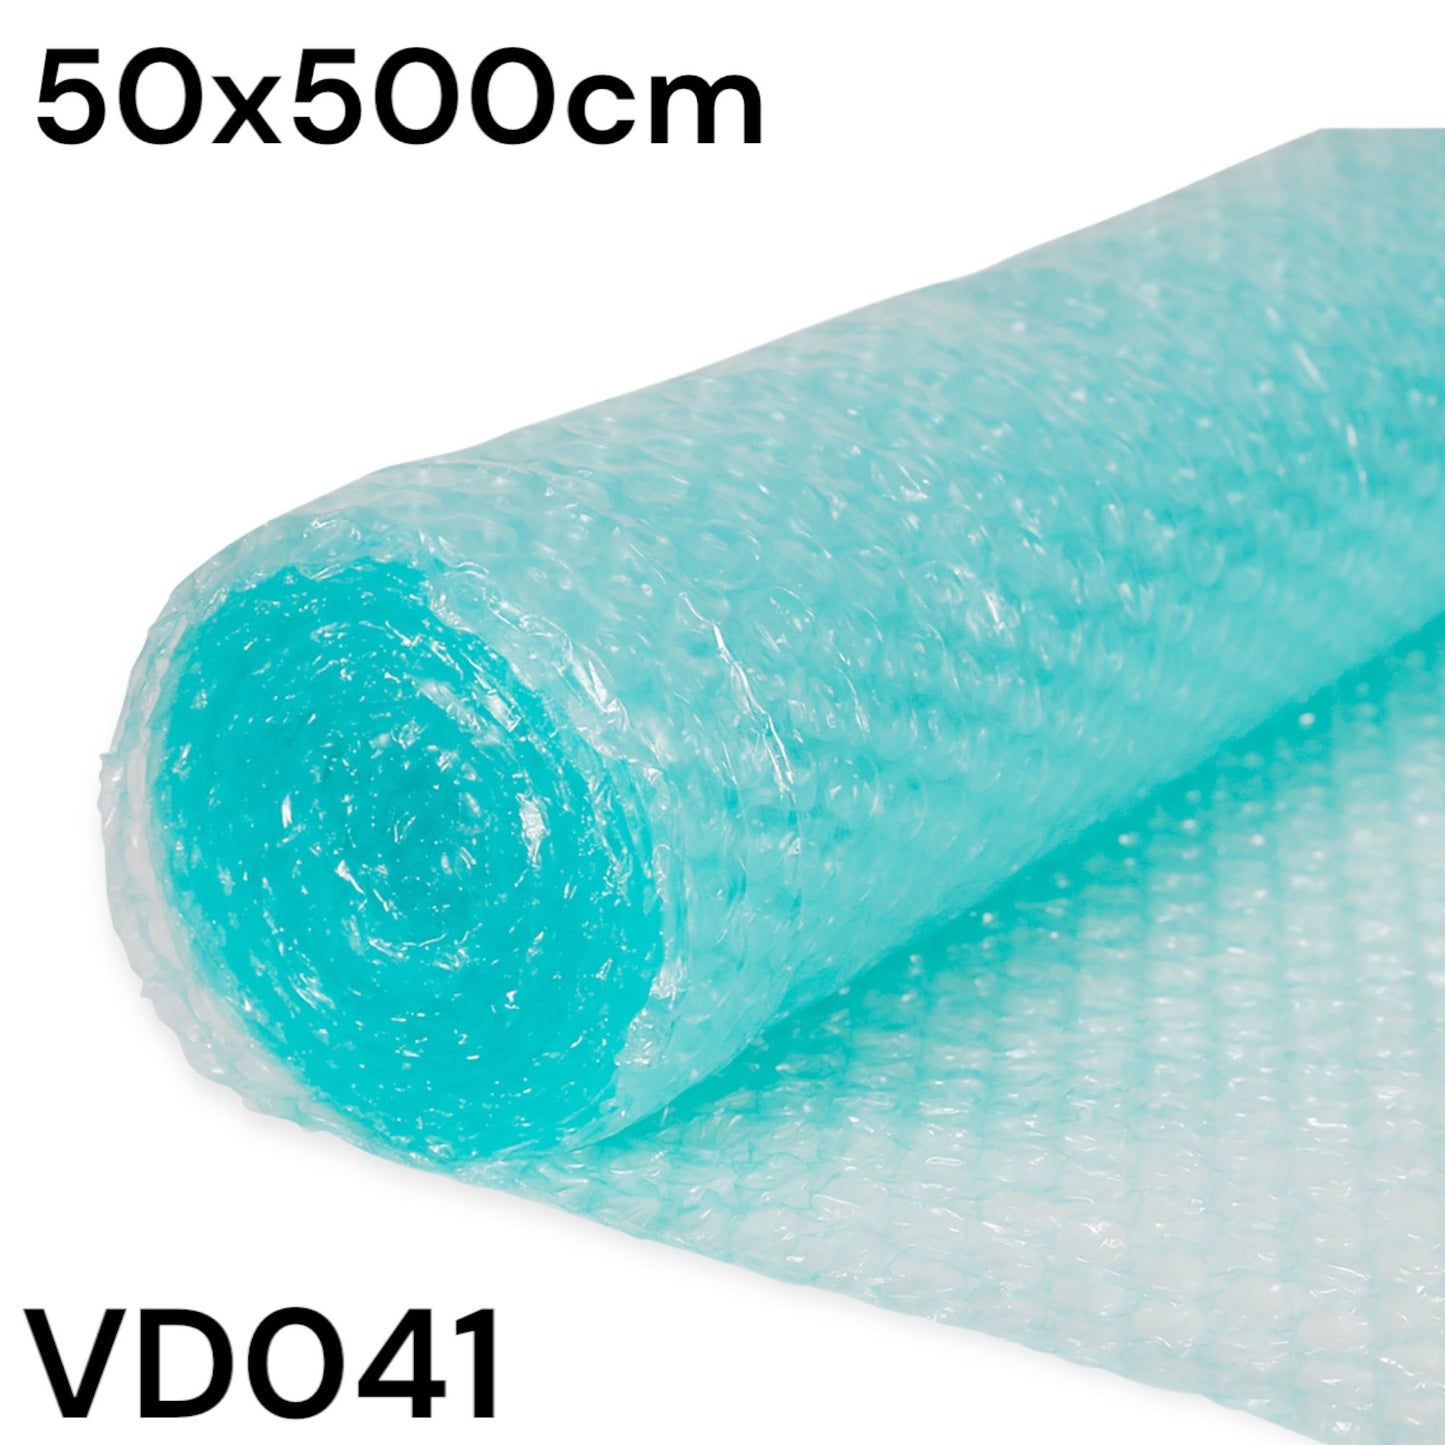 Timmy Toys - VD041 - Roll of Green Bubble Wrap Plastic - 50x500cm - 1 Piece